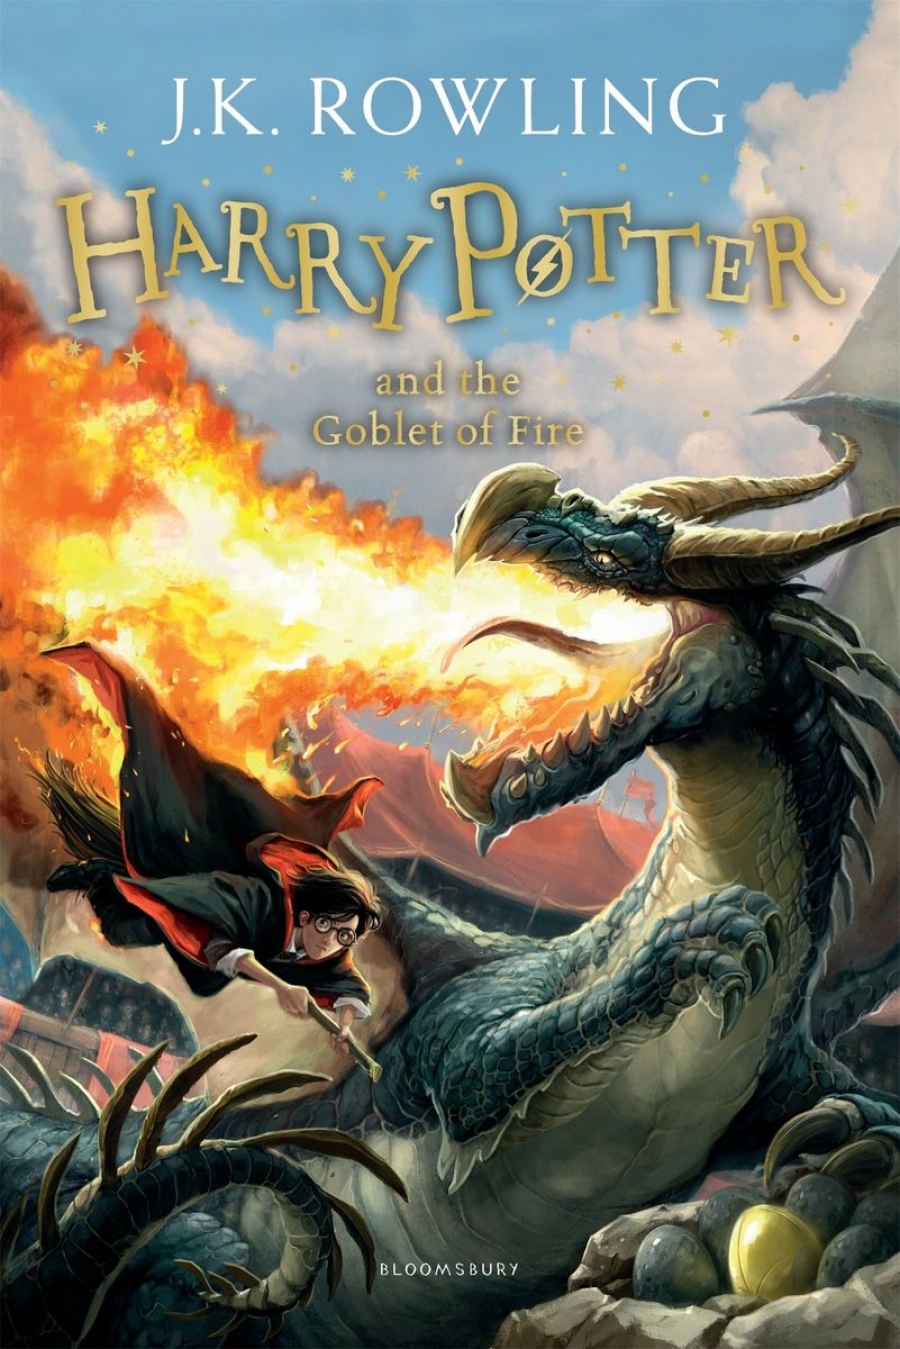 Rowling J.K. Harry Potter and the Goblet of Fire HB 